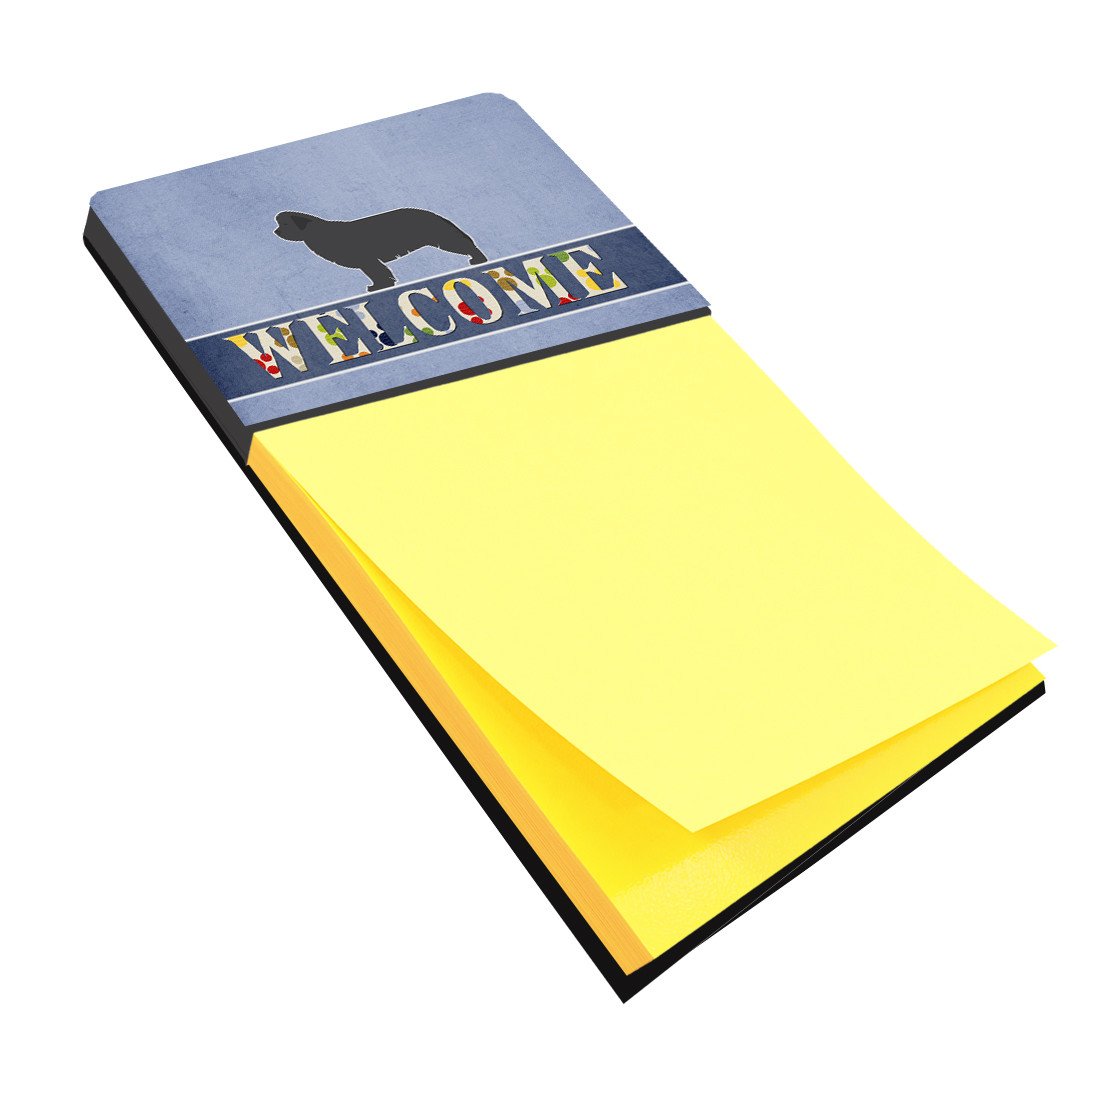 Newfoundland Welcome Sticky Note Holder BB5568SN by Caroline's Treasures